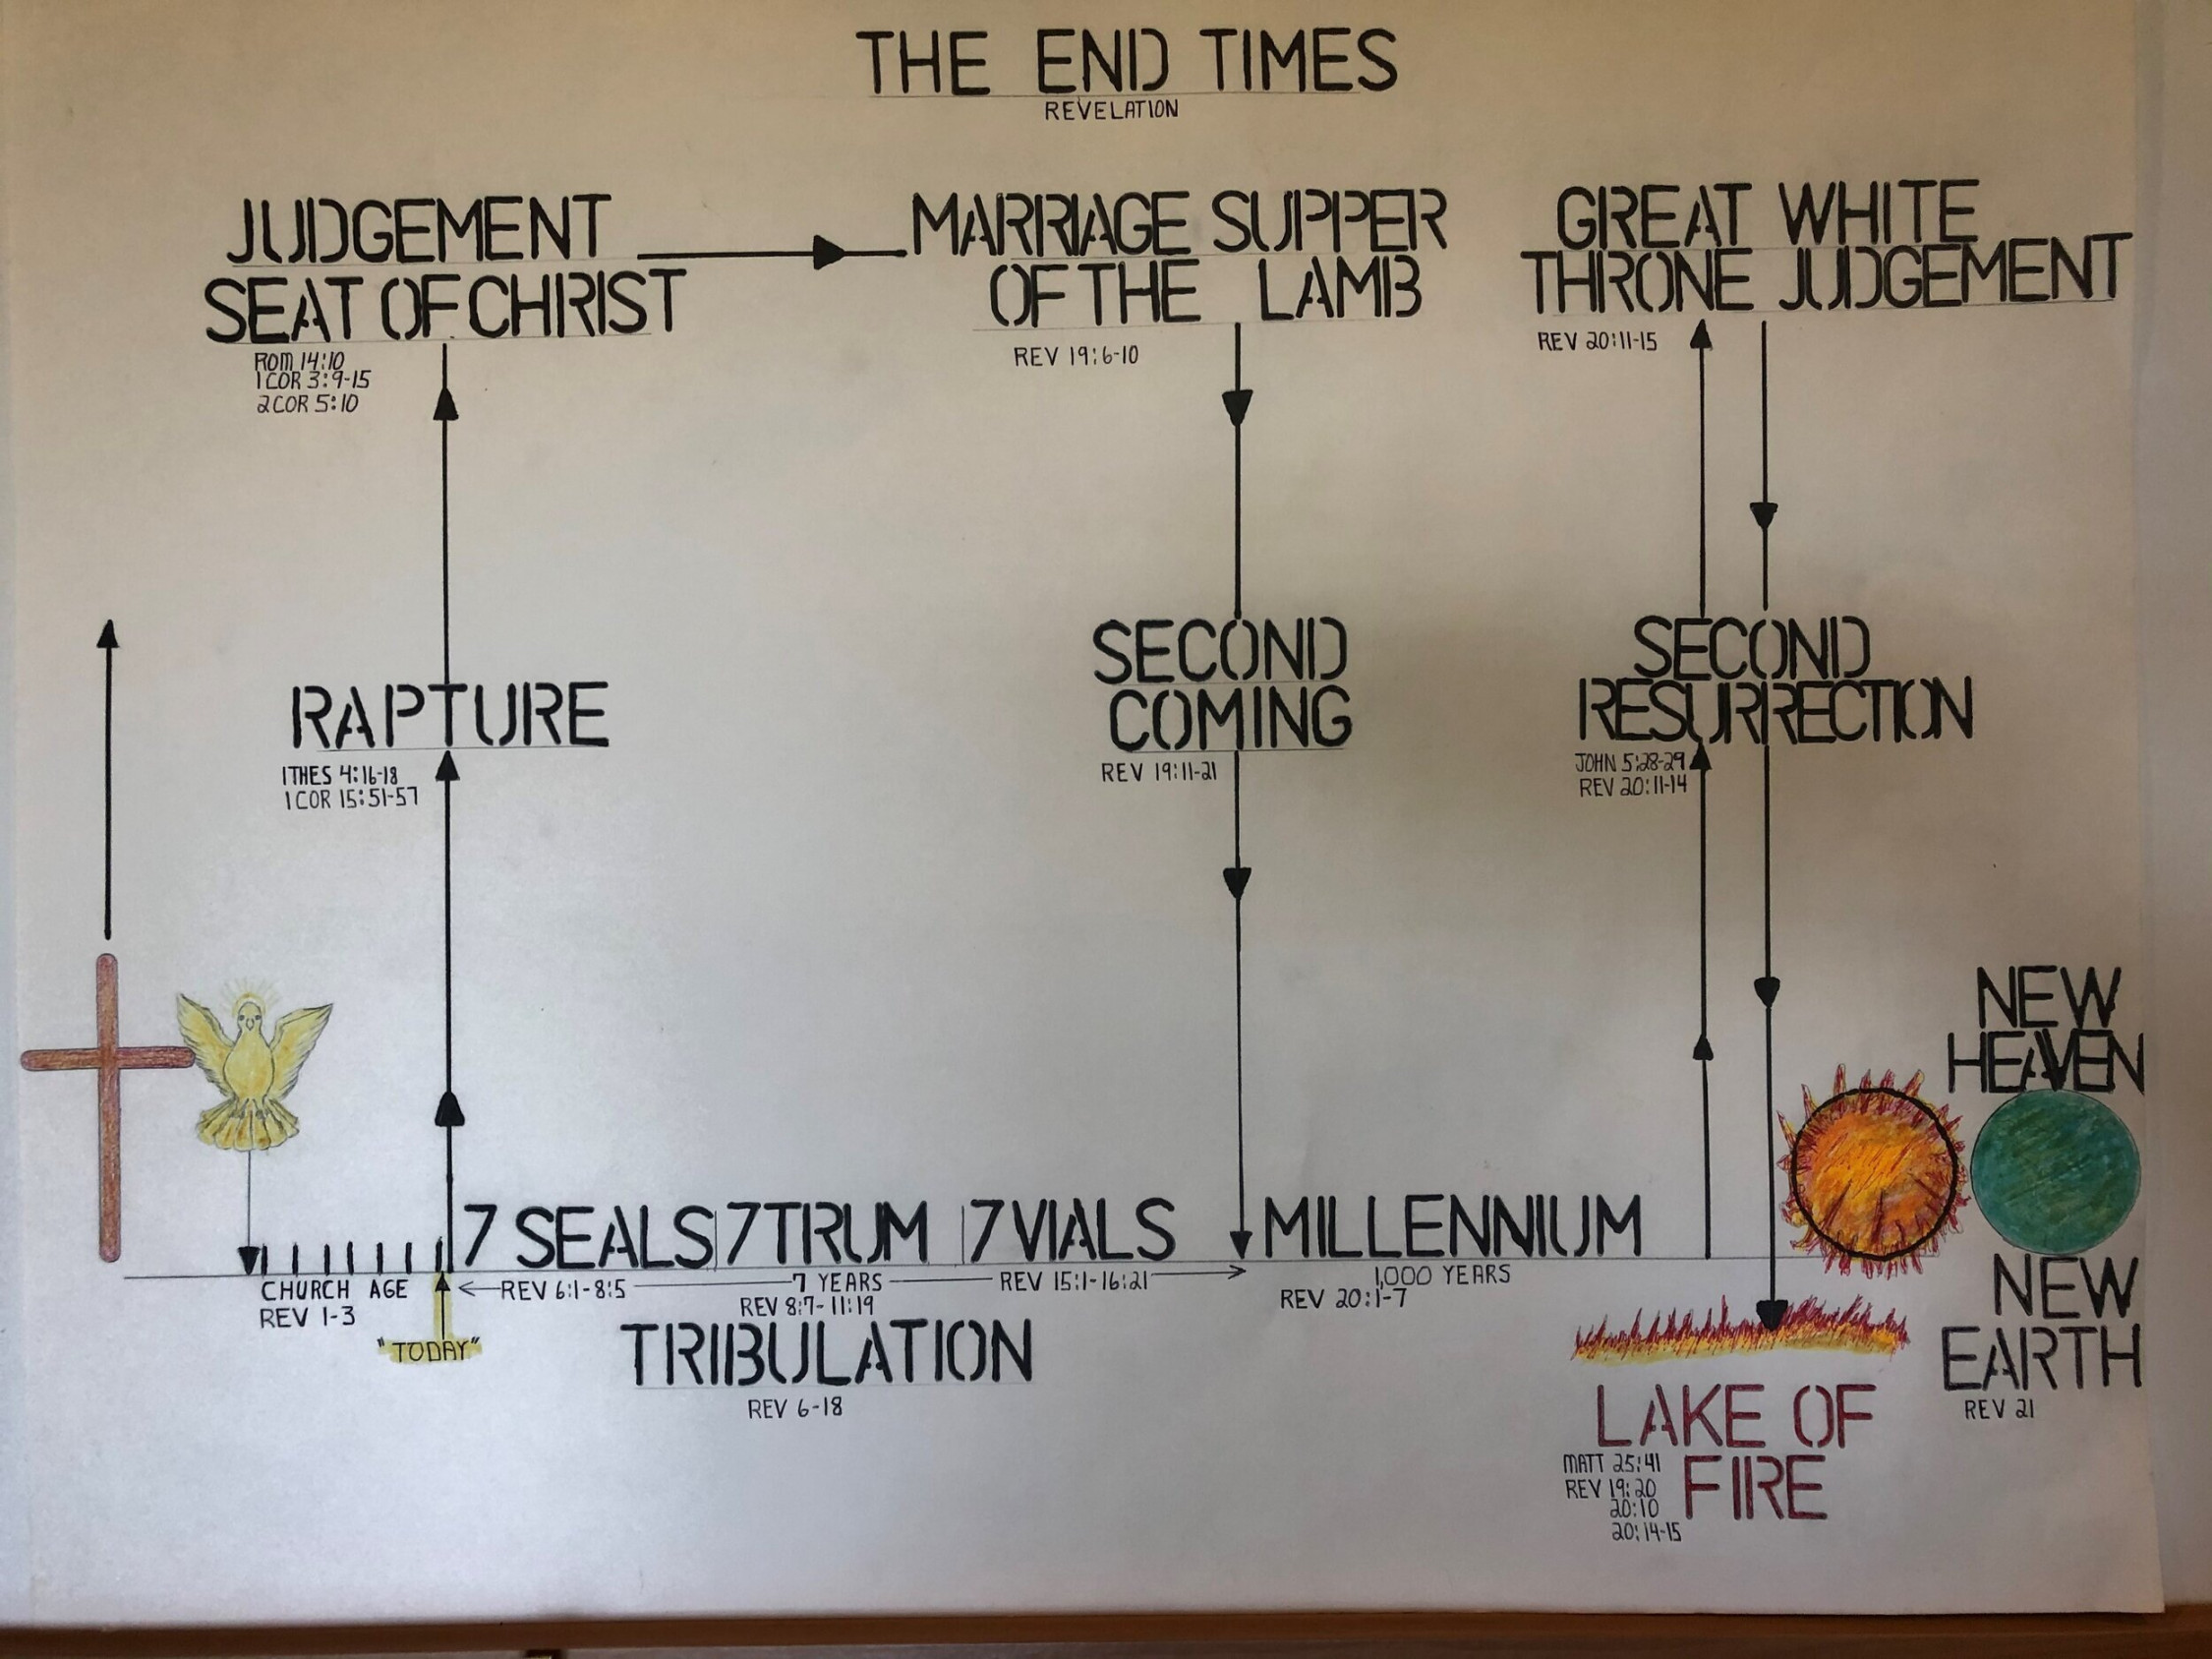 A Timetable of Events for the End Times — Oxford United Methodist